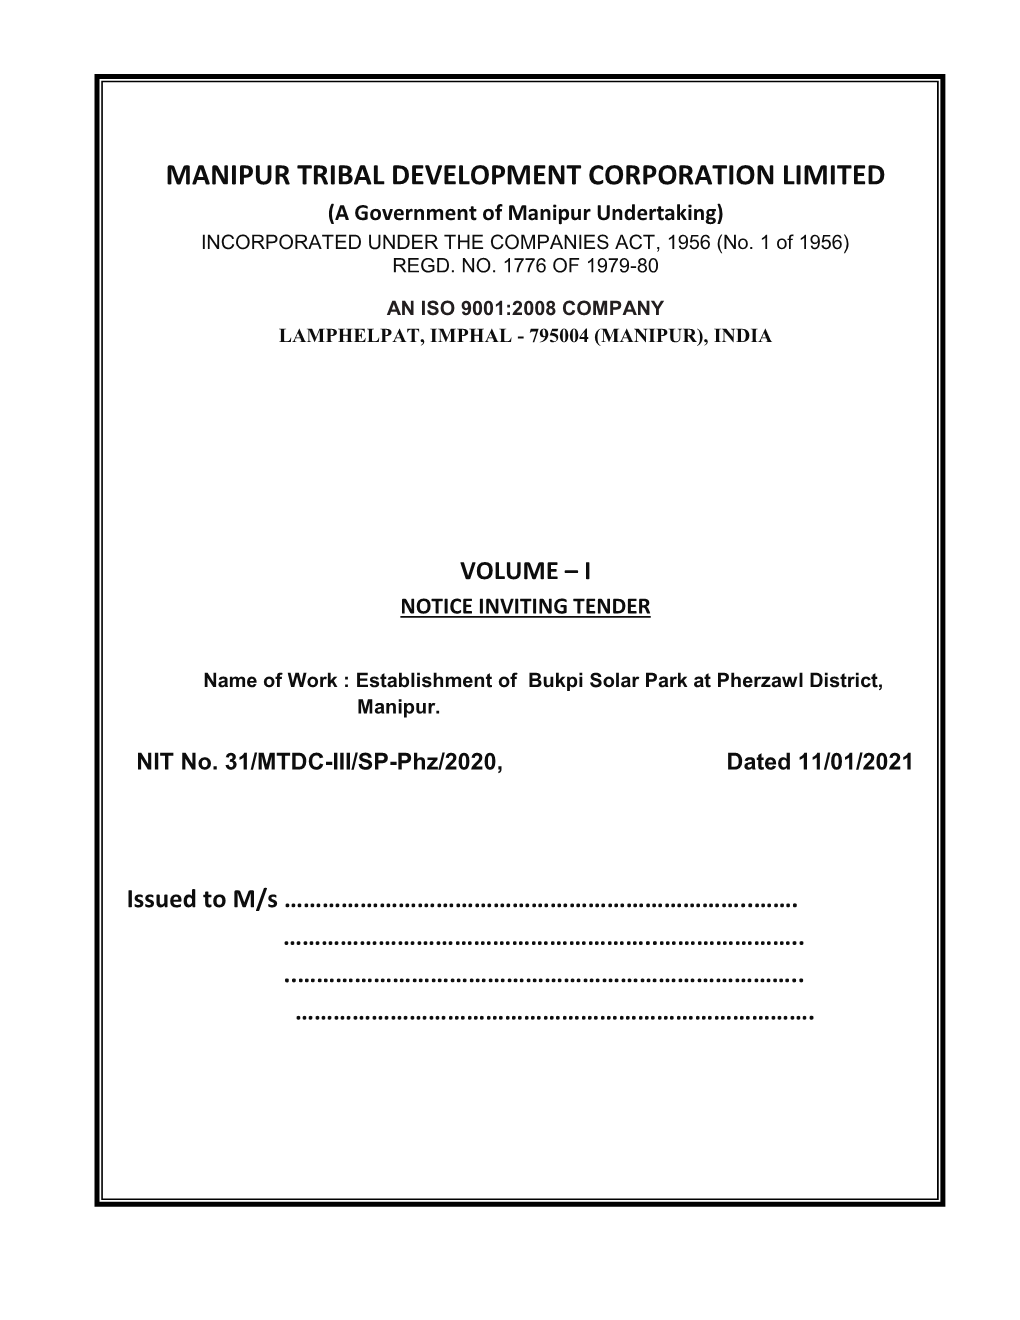 MANIPUR TRIBAL DEVELOPMENT CORPORATION LIMITED (A Government of Manipur Undertaking) INCORPORATED UNDER the COMPANIES ACT, 1956 (No